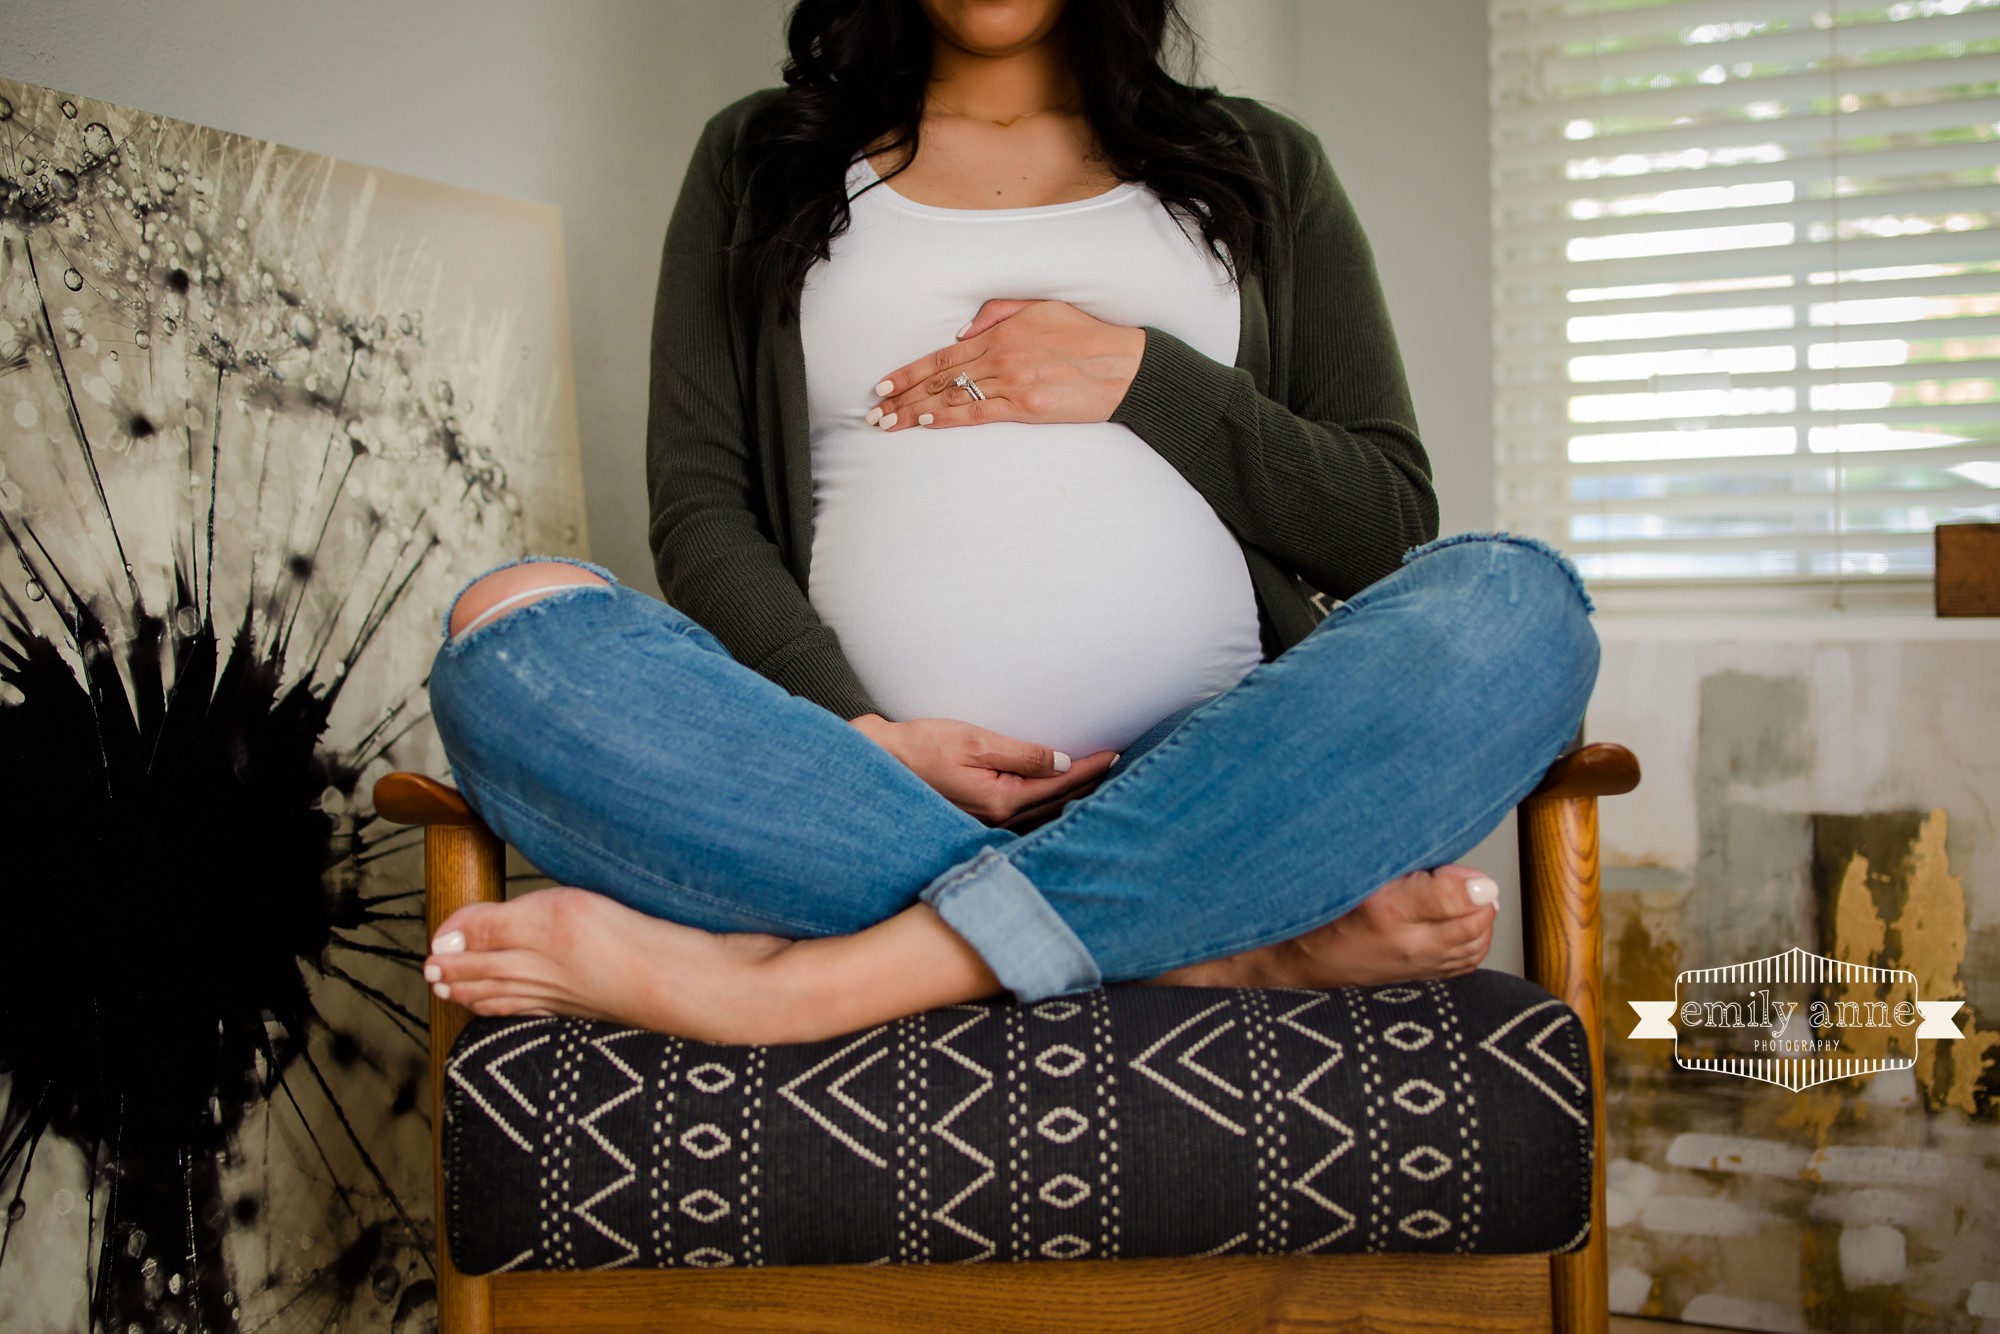 indoor maternity session